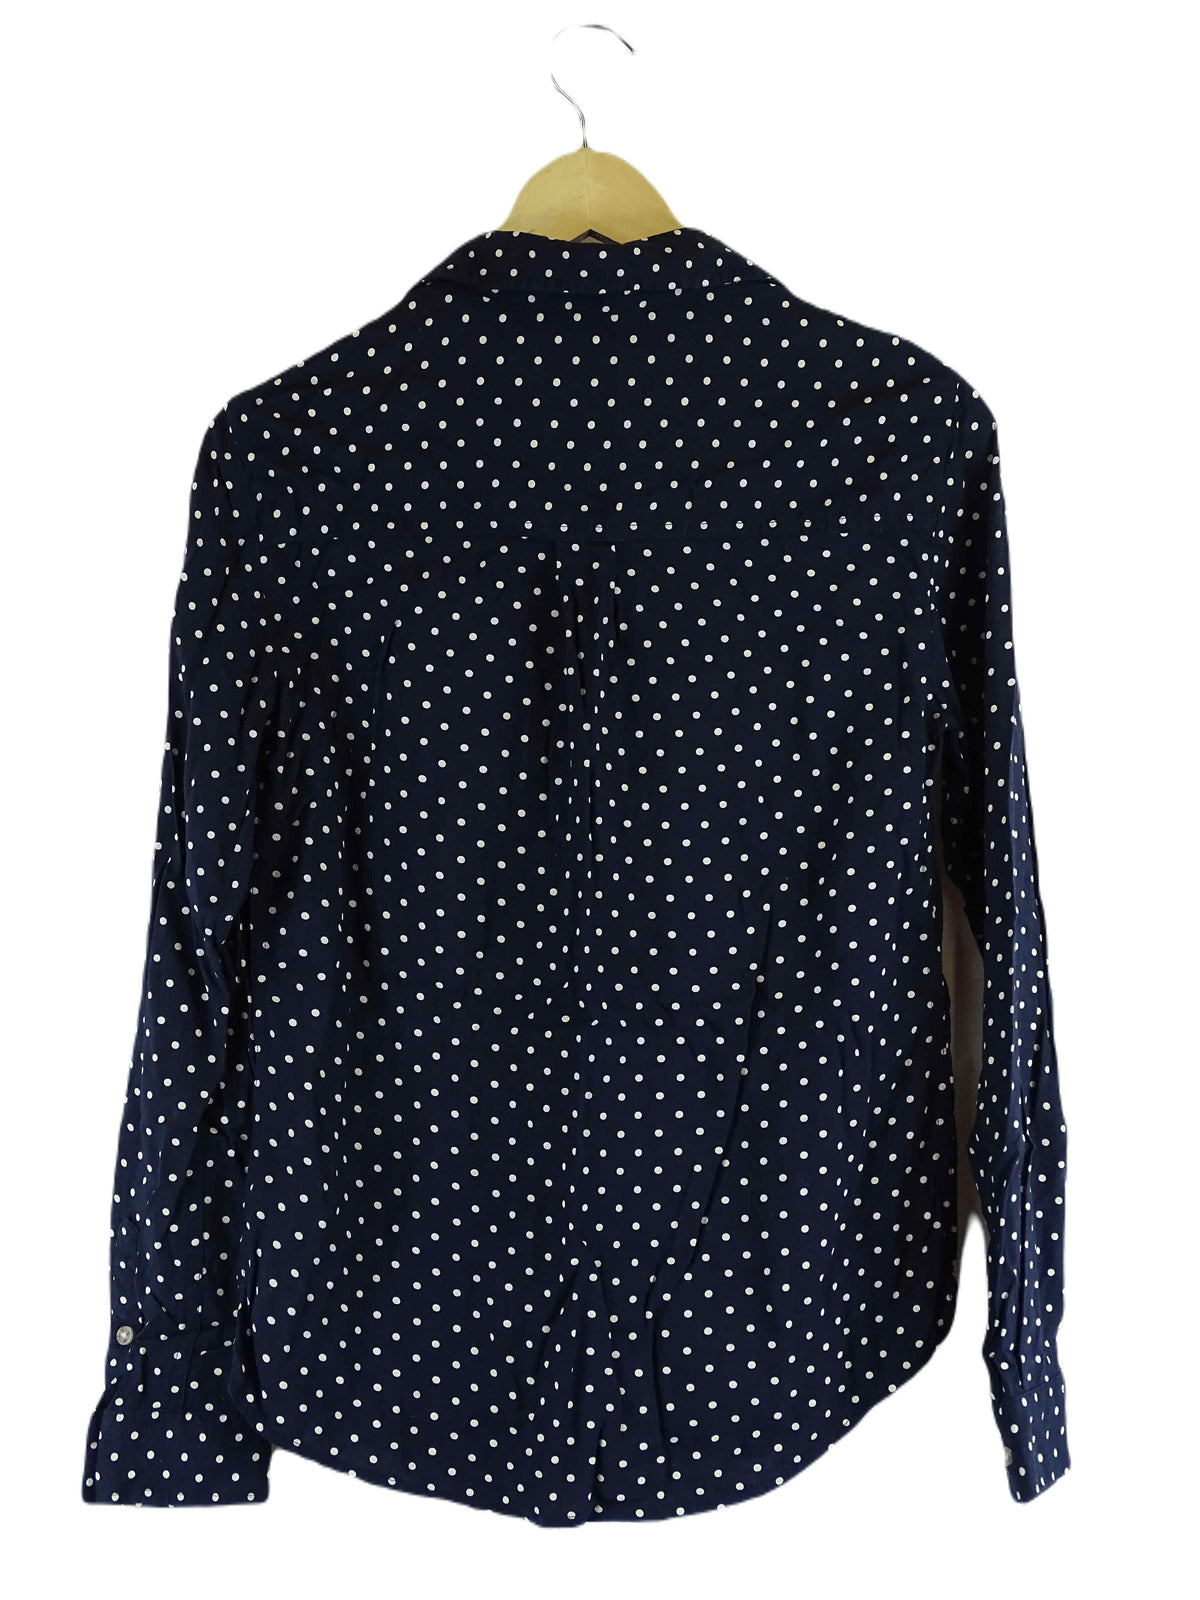 M &amp; S Blue And White Polka Dot Long Sleeve Top 8